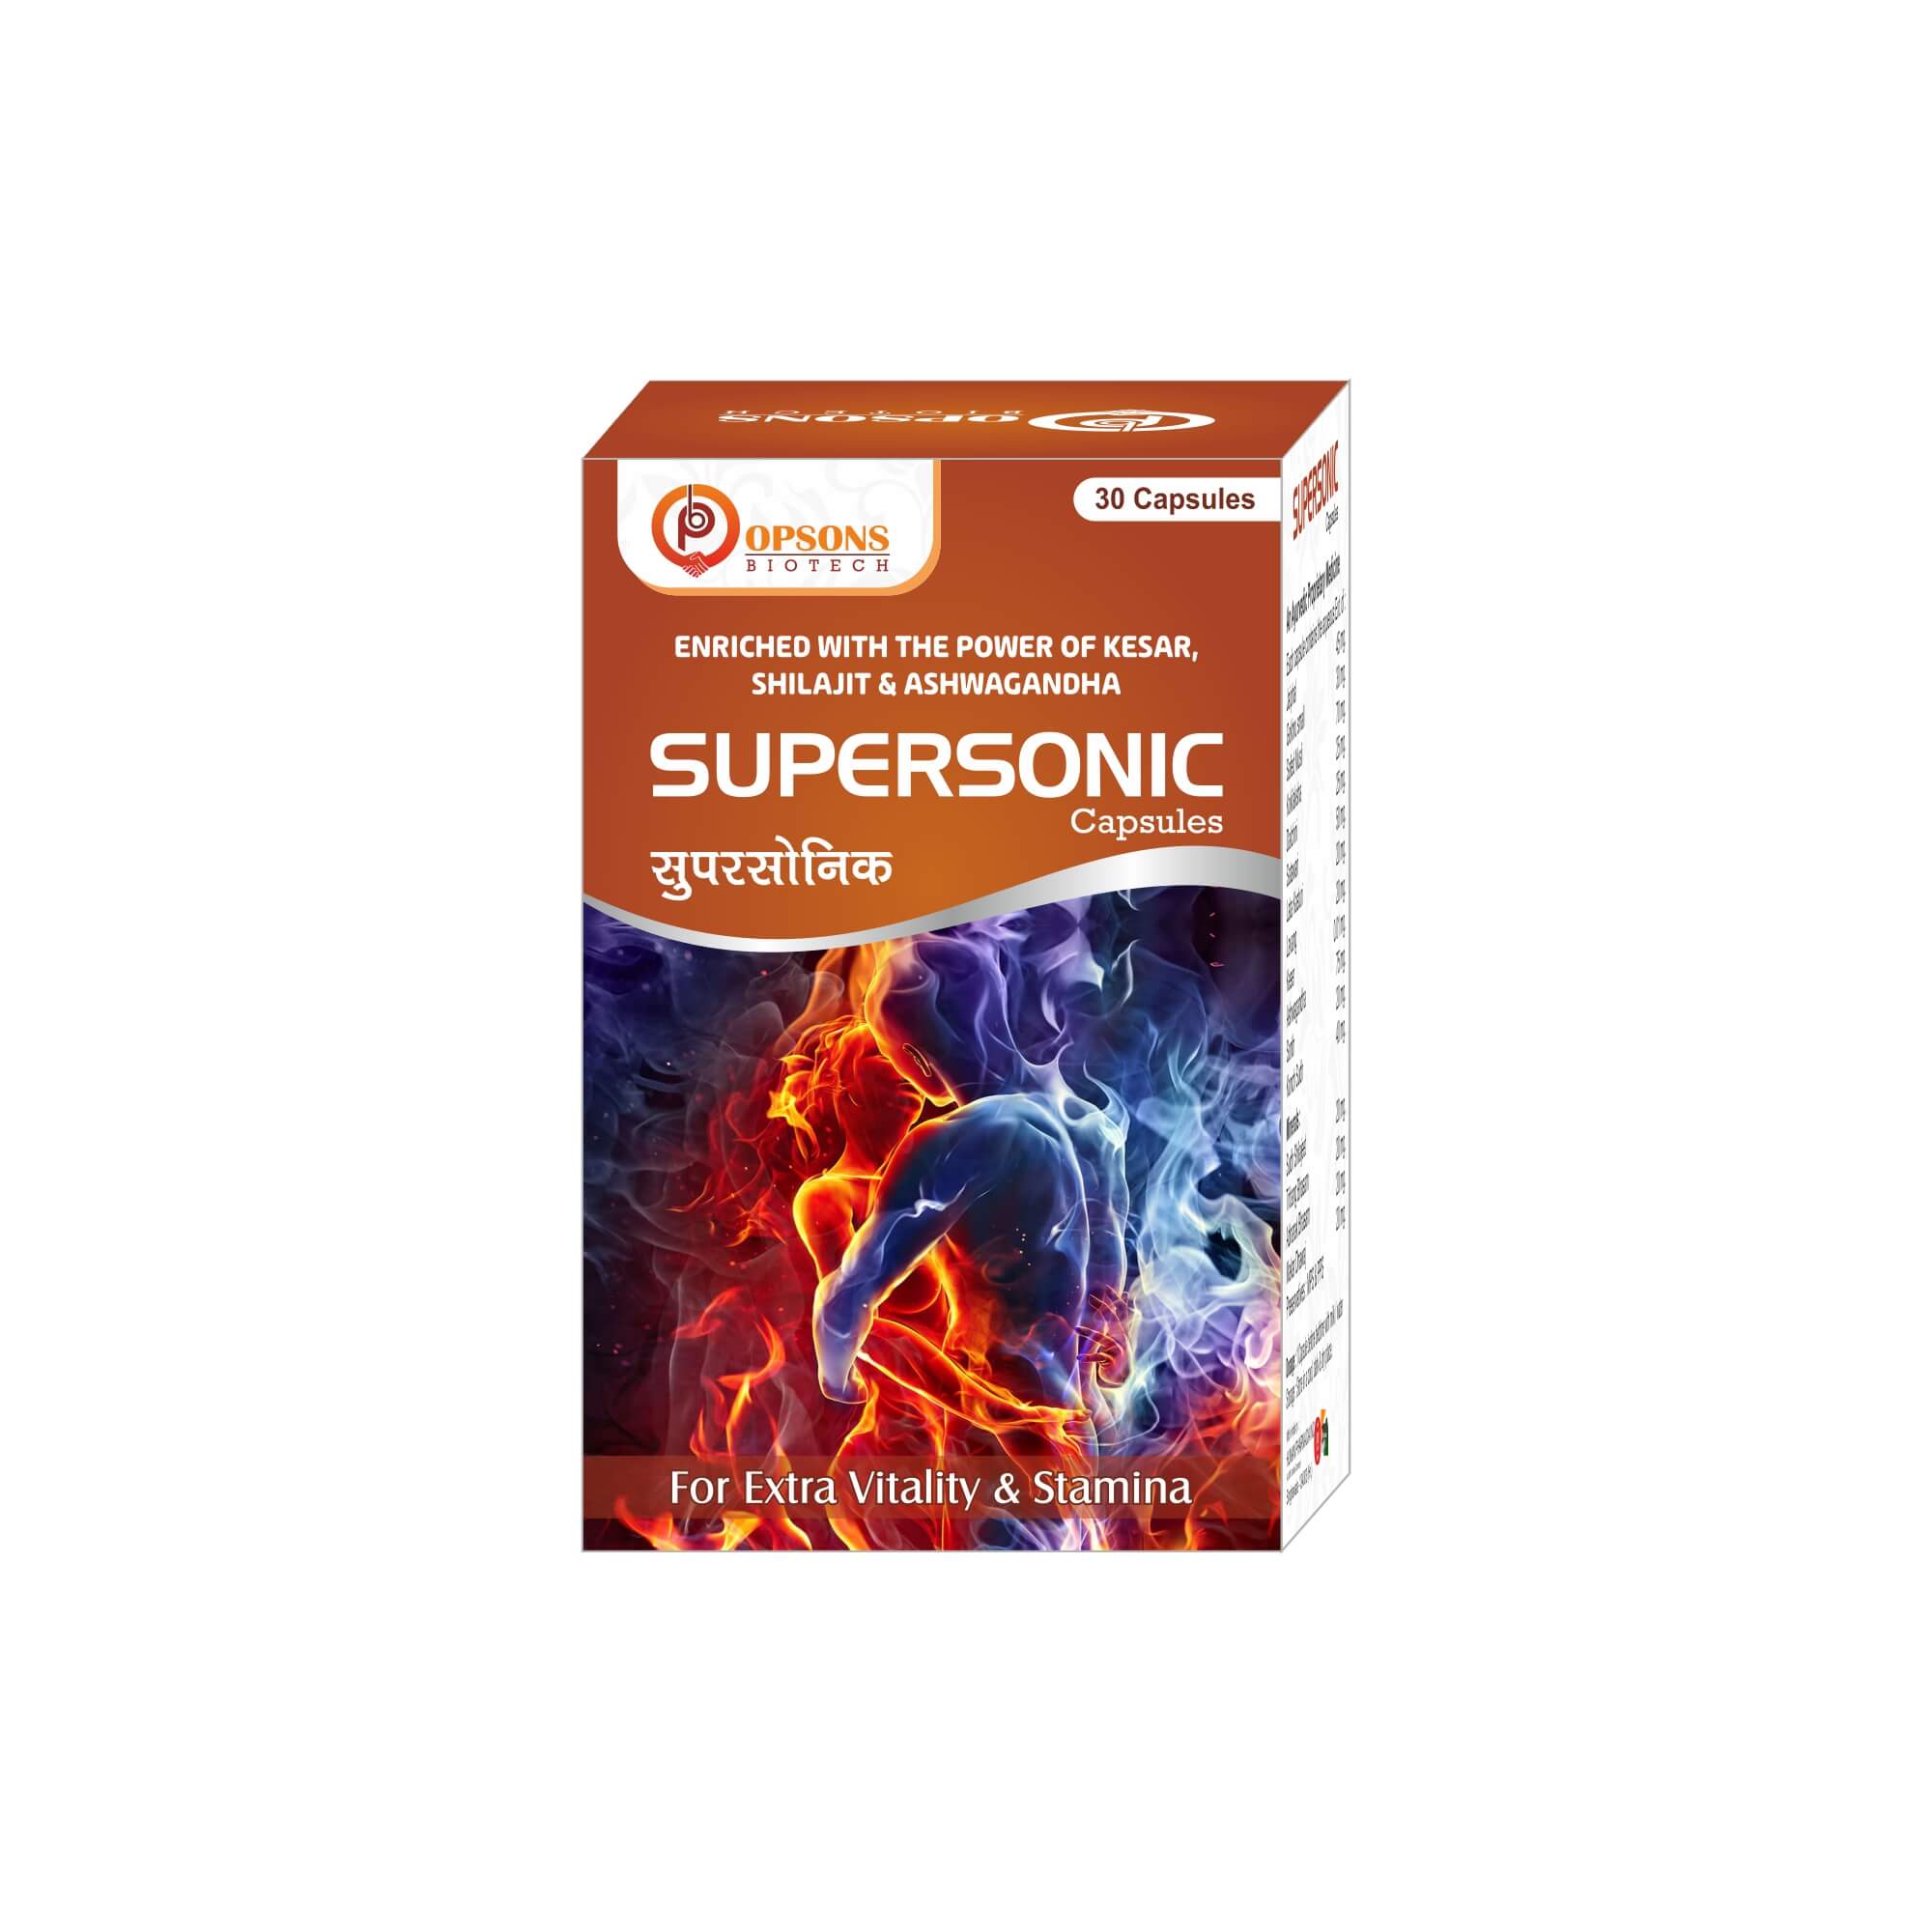 Product Name: Supersonic Capsules, Compositions of Supersonic Capsules are Enriched With The Powder Of Kesar, Shilajit  & Ashwagandha - Opsons Biotech